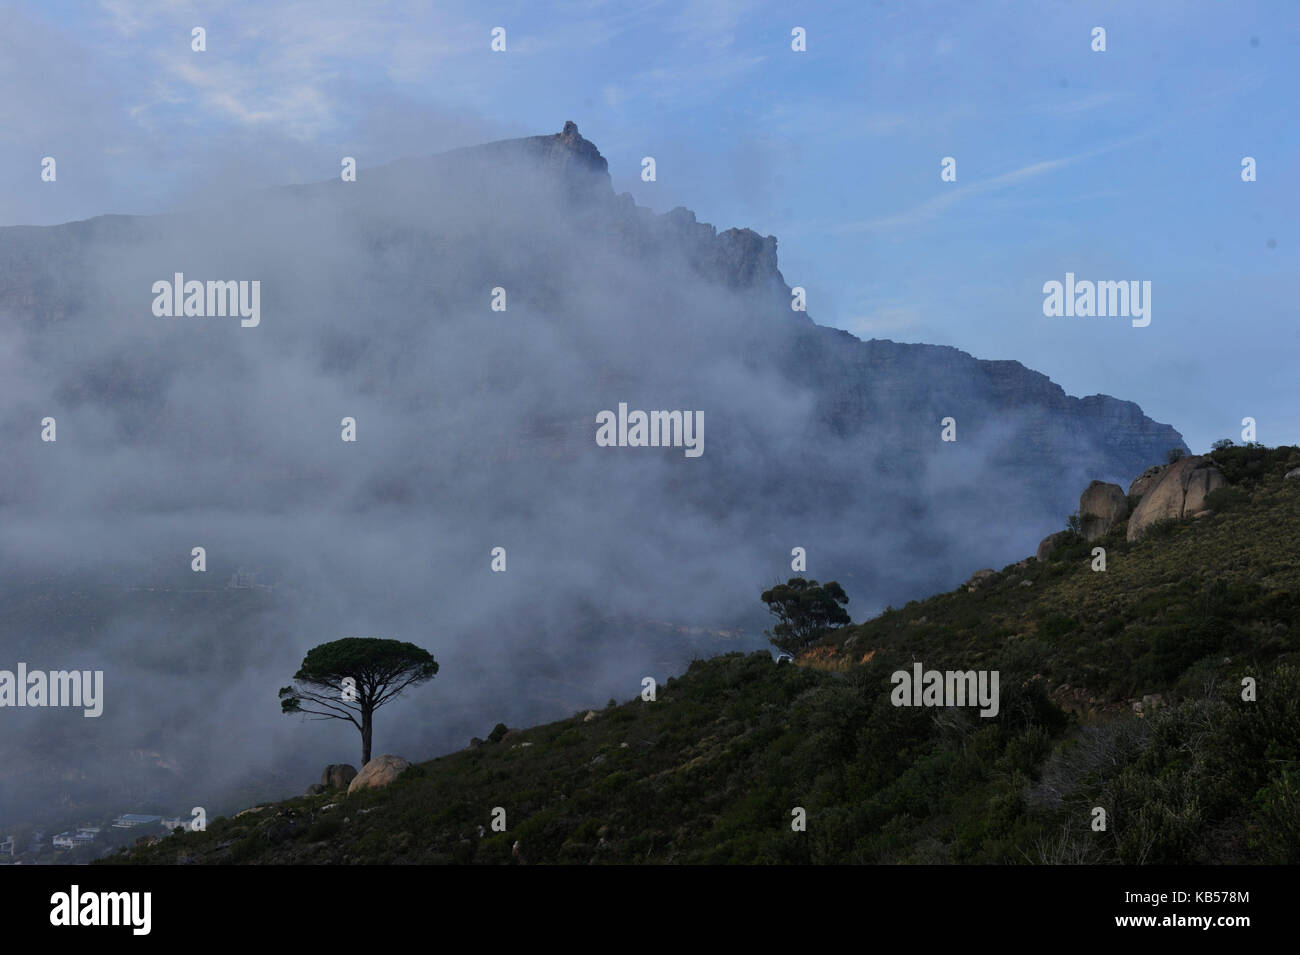 South Africa, Western Cape, fog over Cape Town, view from Signal Hill road Stock Photo